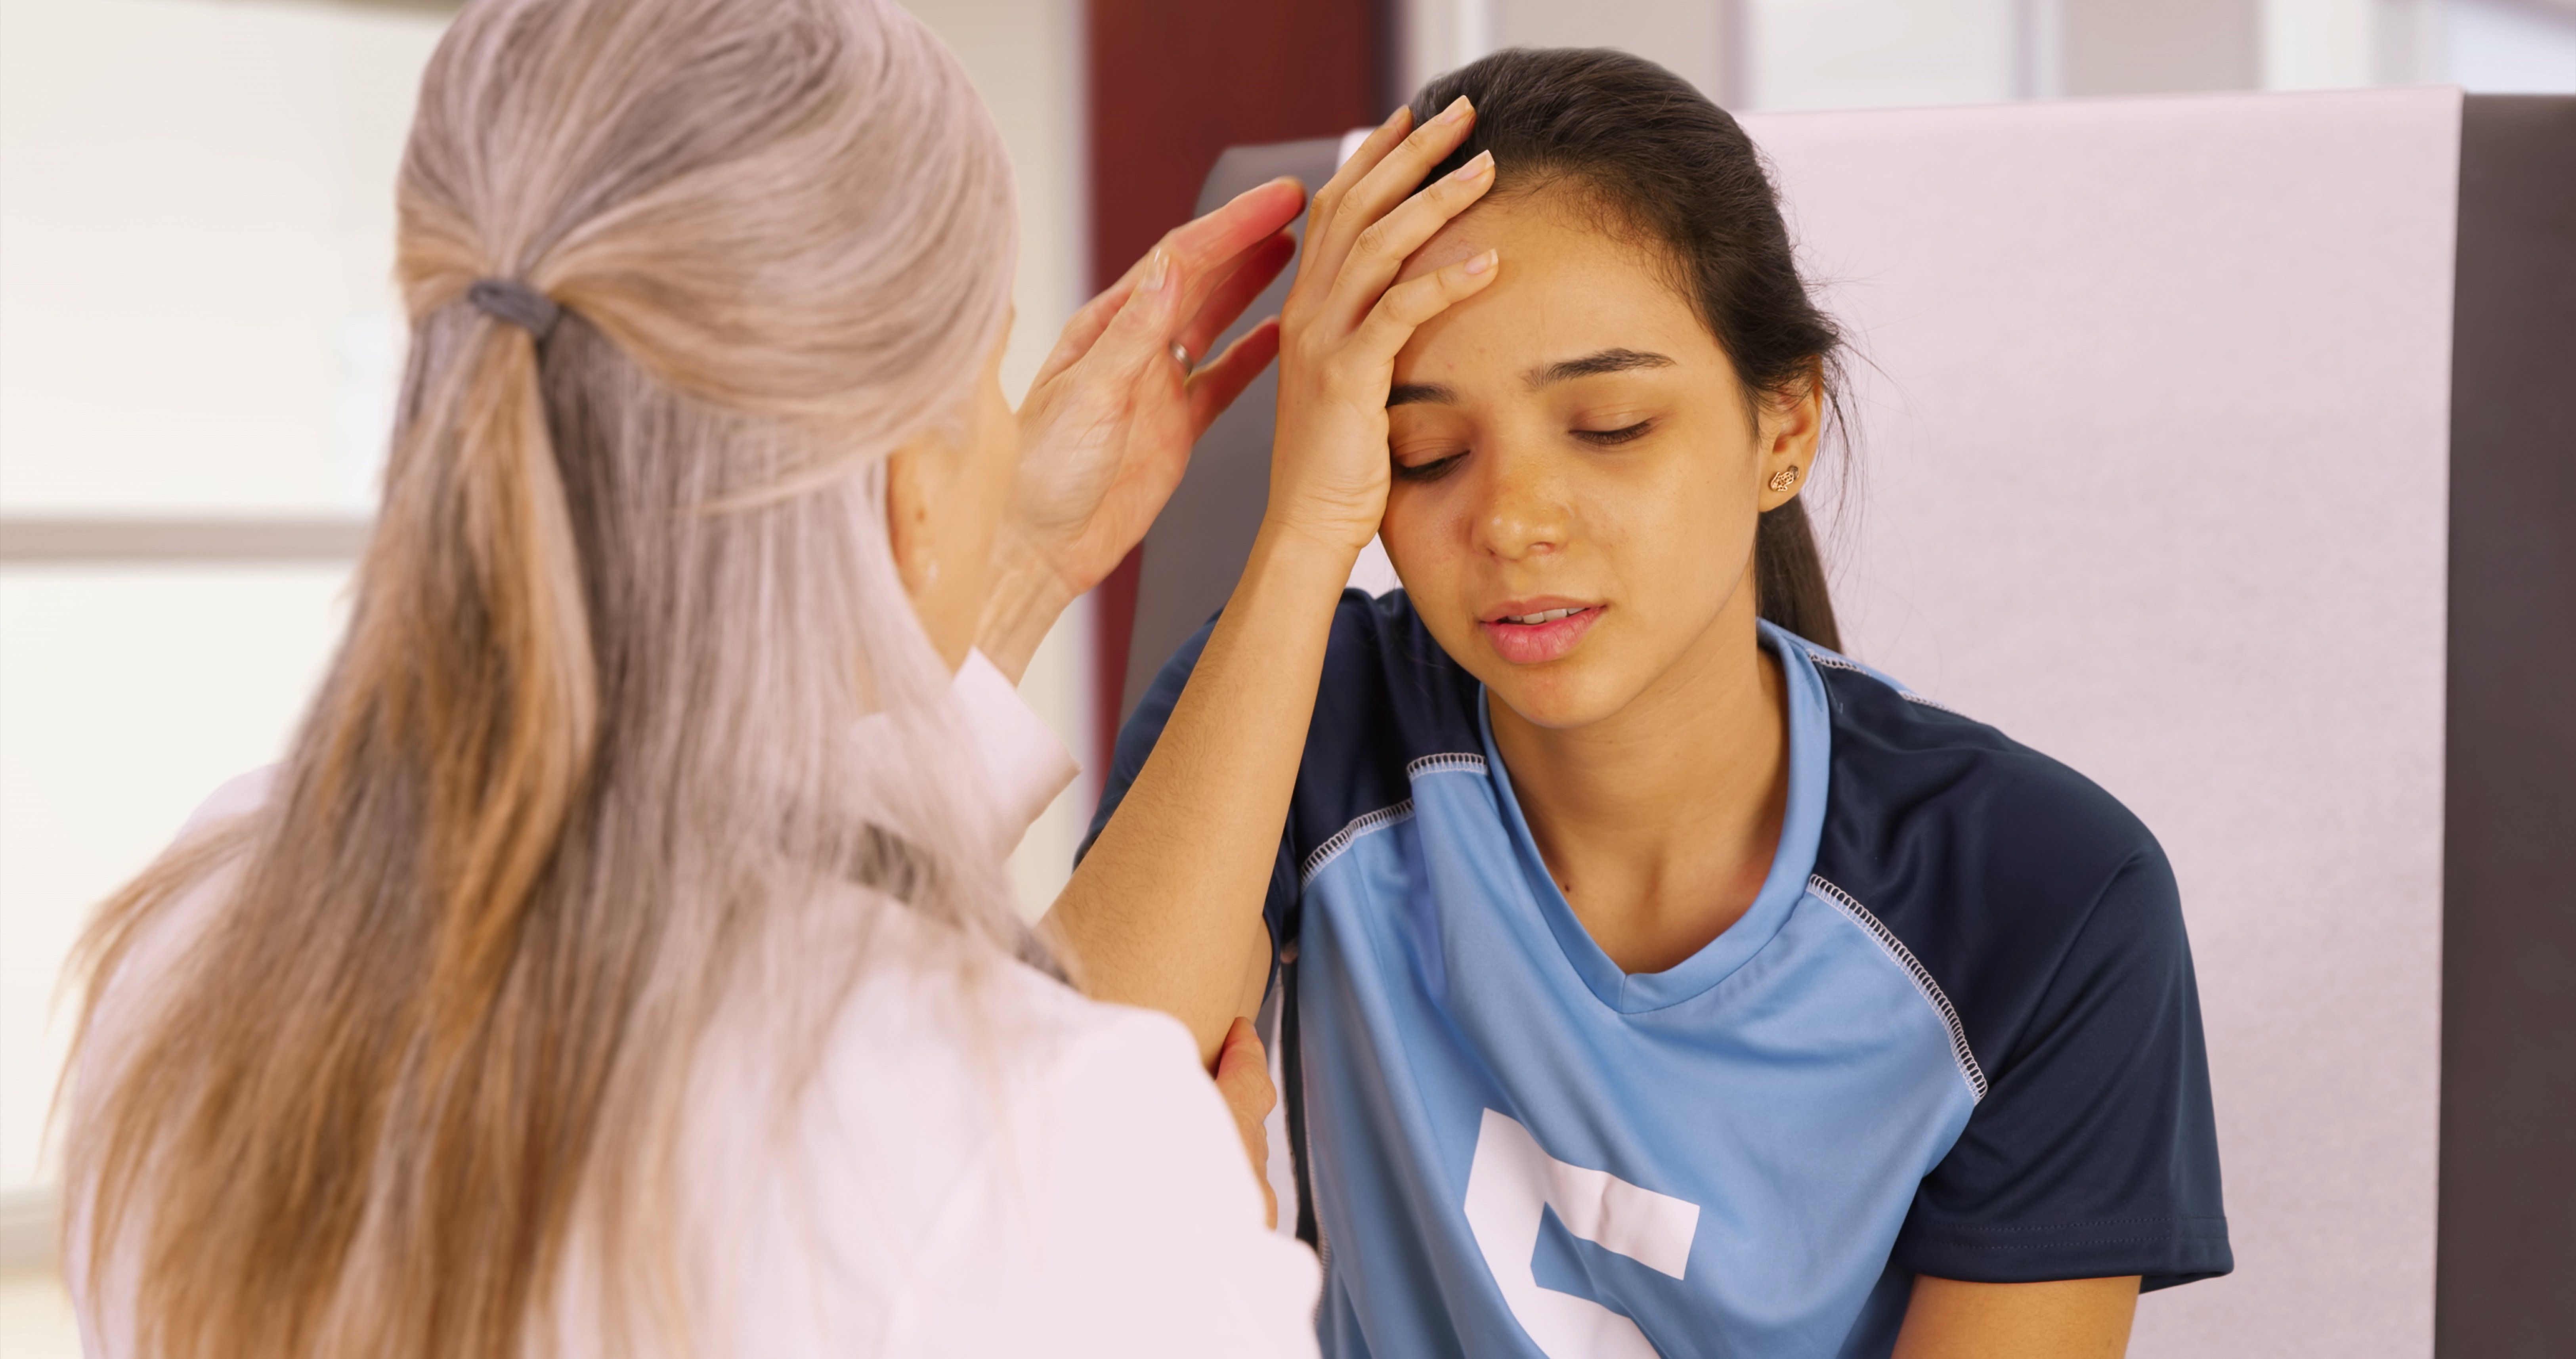 Treatment Options to Recover From Concussion